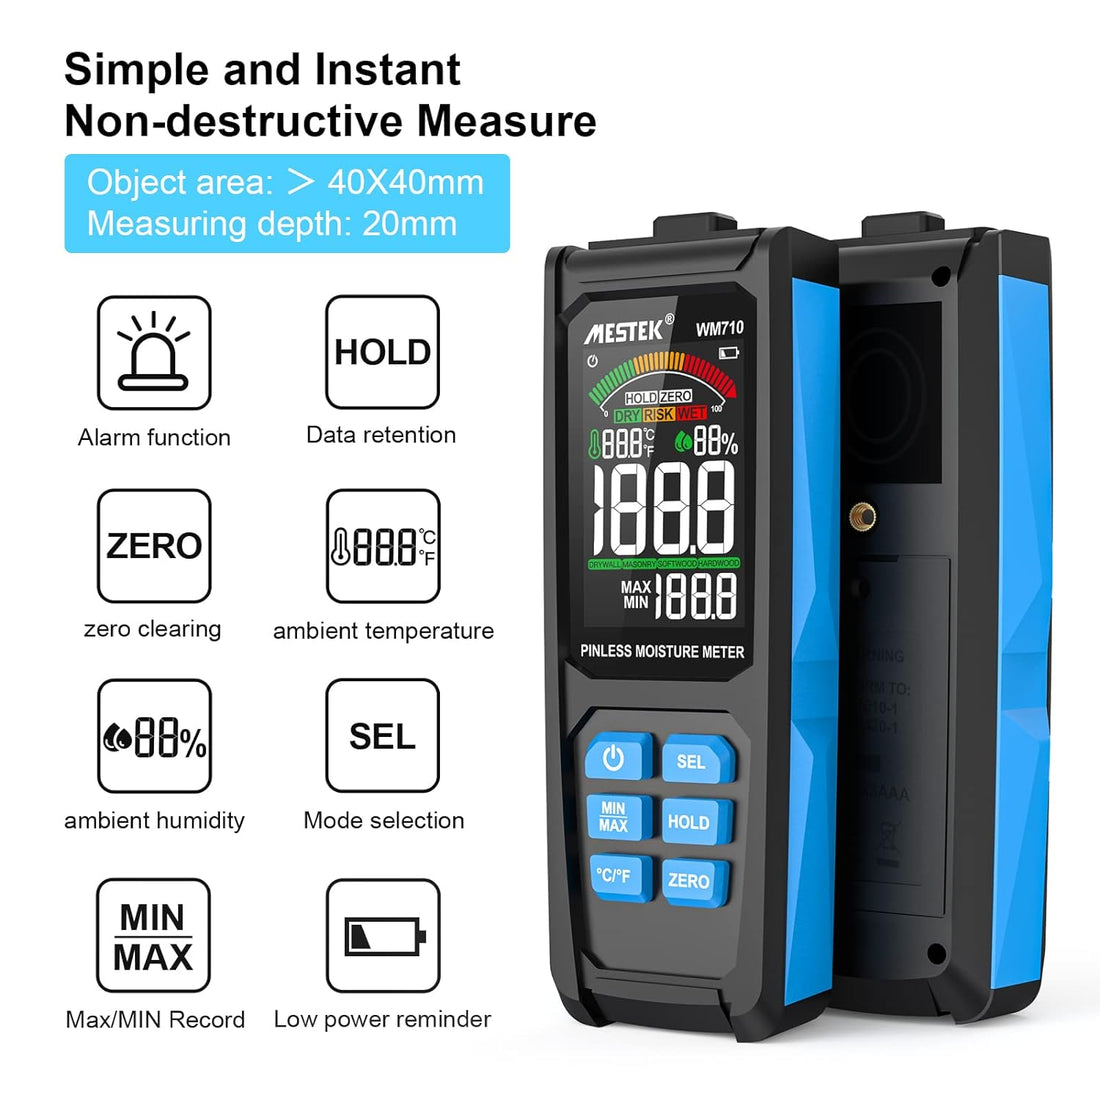 MESTEK Pinless Wood Moisture Meter Drywall Moisture Detector for Lumber Concrete Building with Backlit Color LCD Display -Wall Moisture Sensor Digital Humidity Tester for Firewood